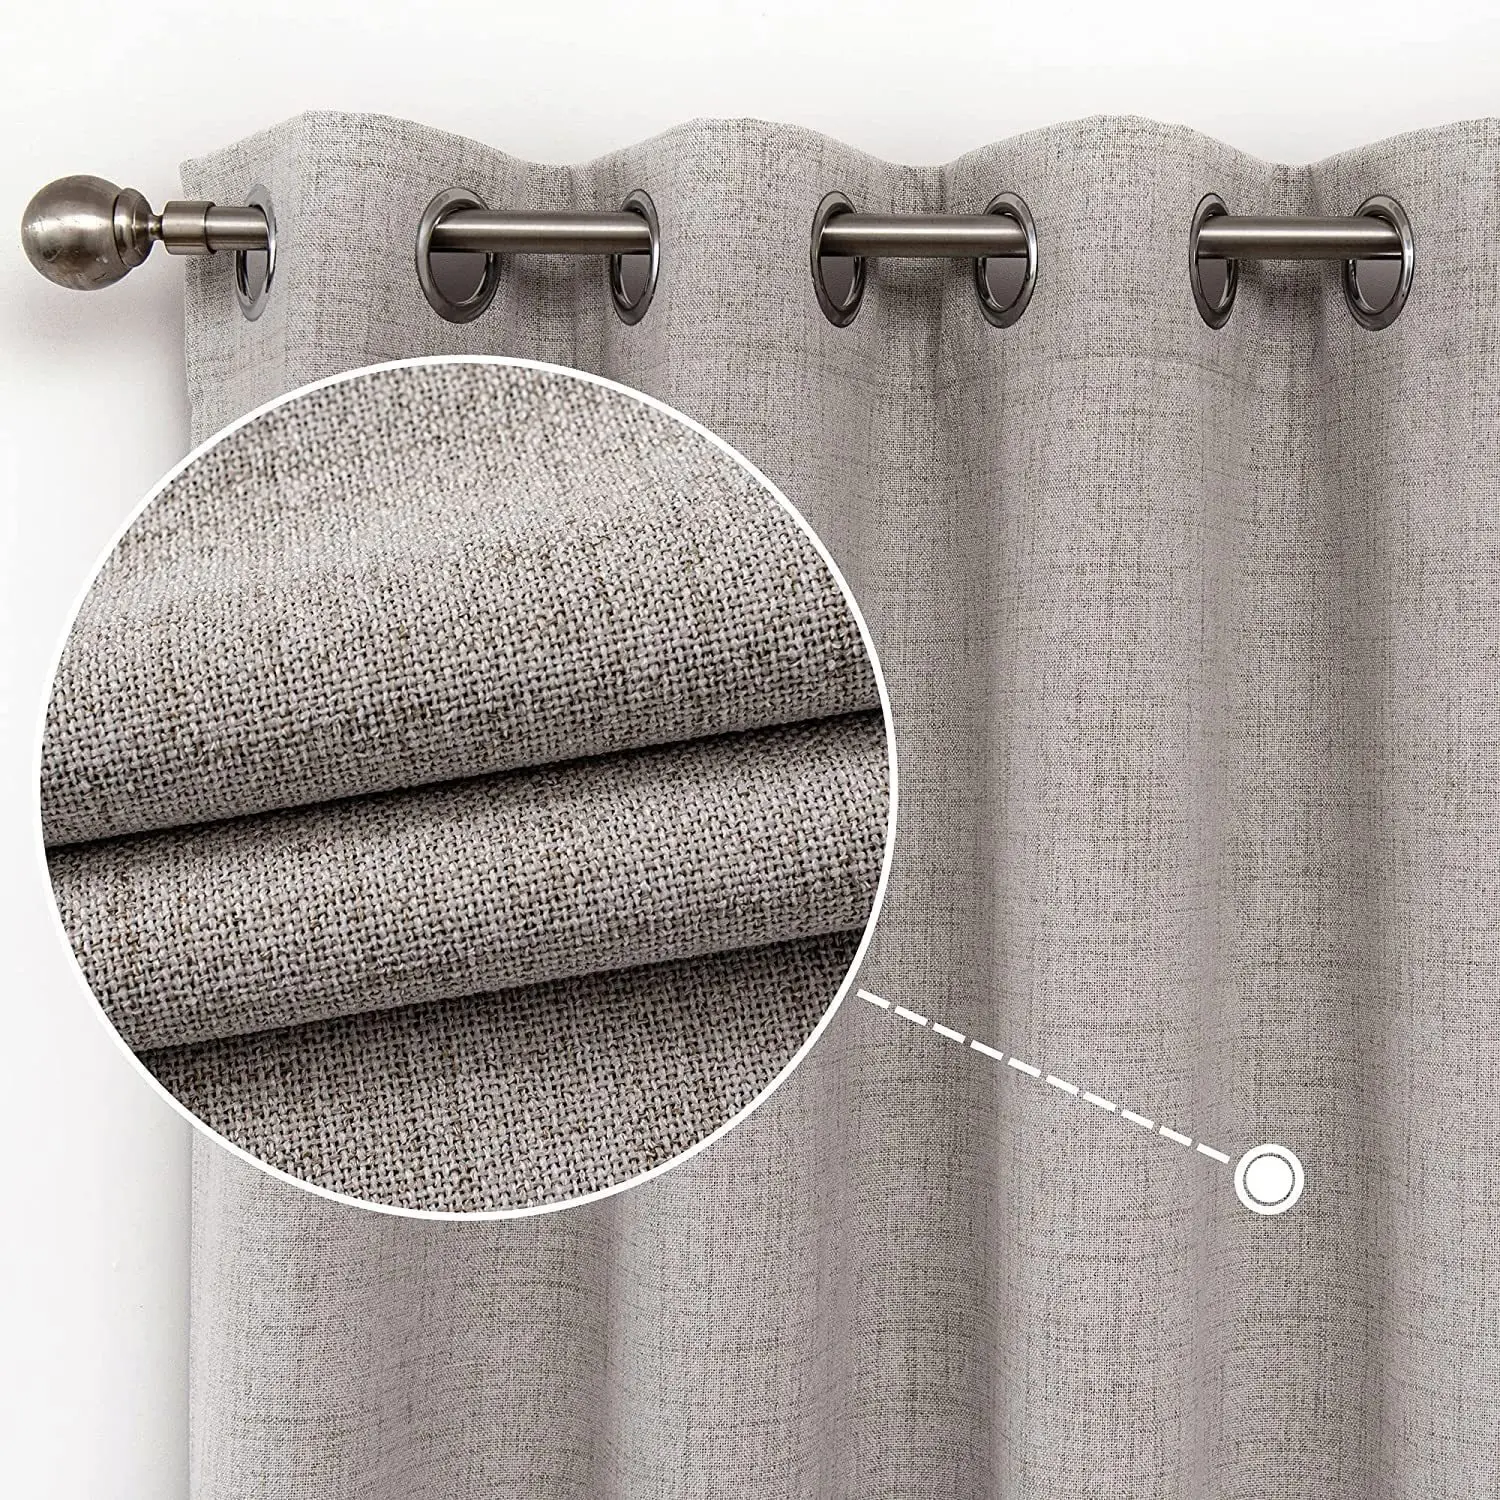 Custom American Polyester Solid Color Bedroom Curtains Thermal Insulated Blackout Window Curtains For The Living Room